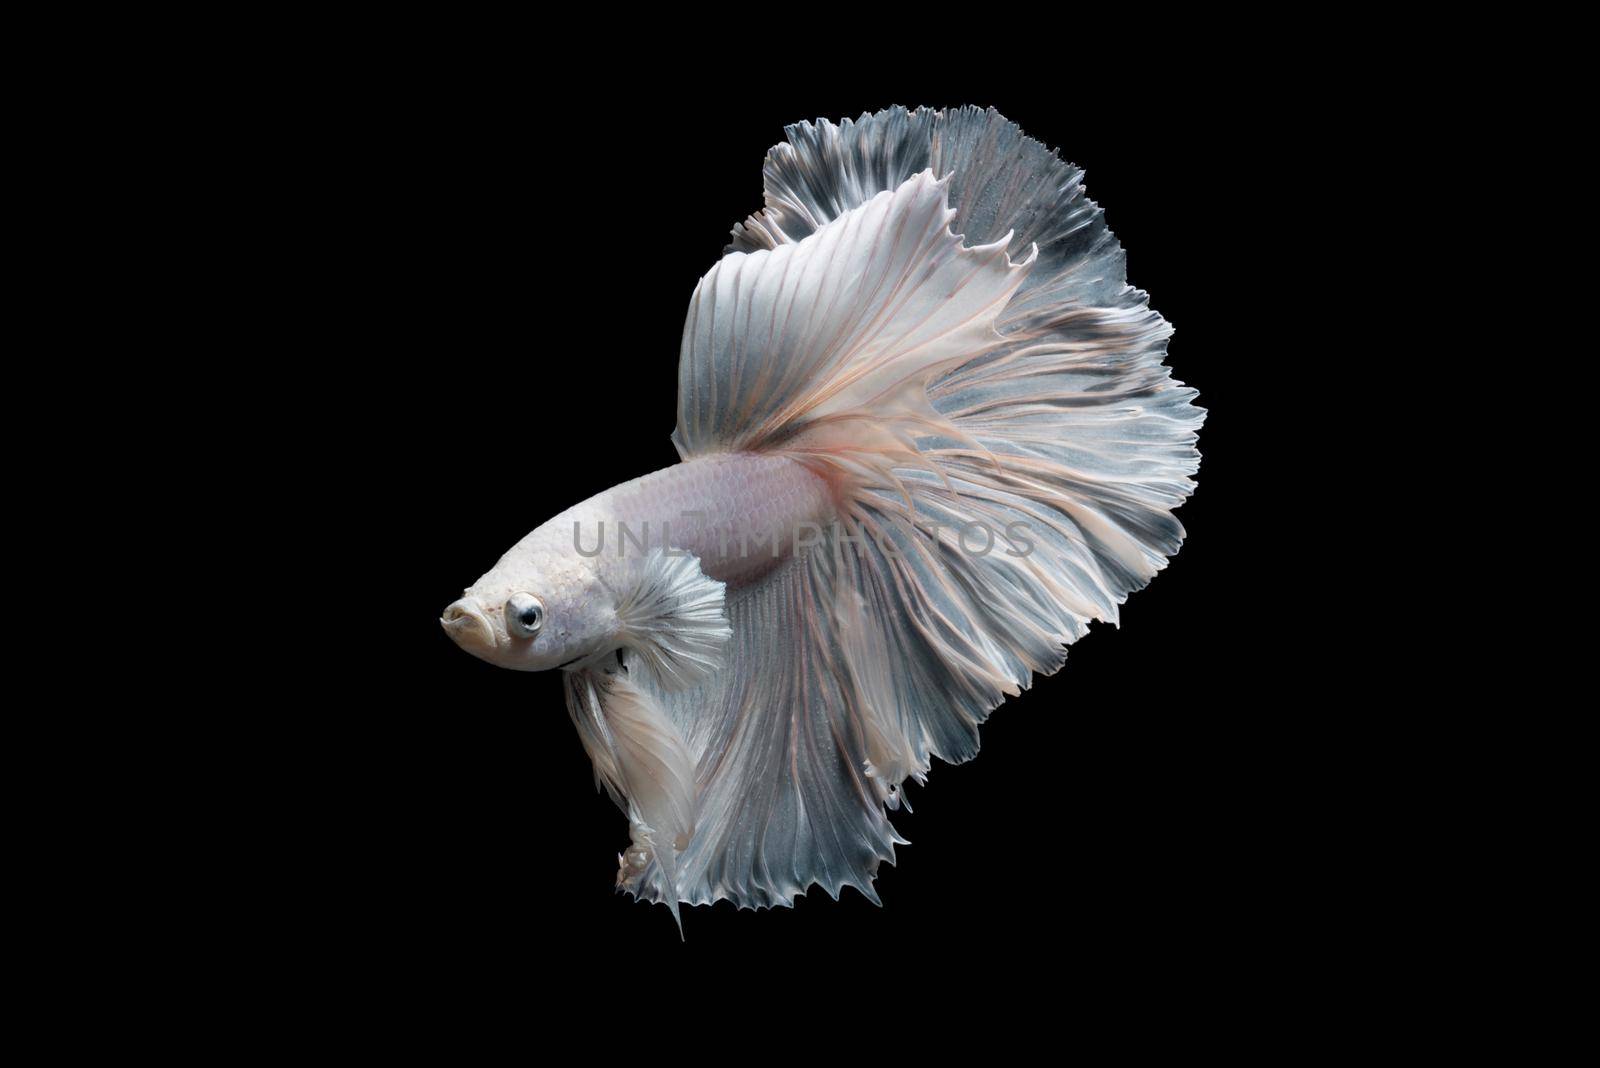 Betta fish or Siamese fighting fish in movement isolated on black background. by Nuamfolio